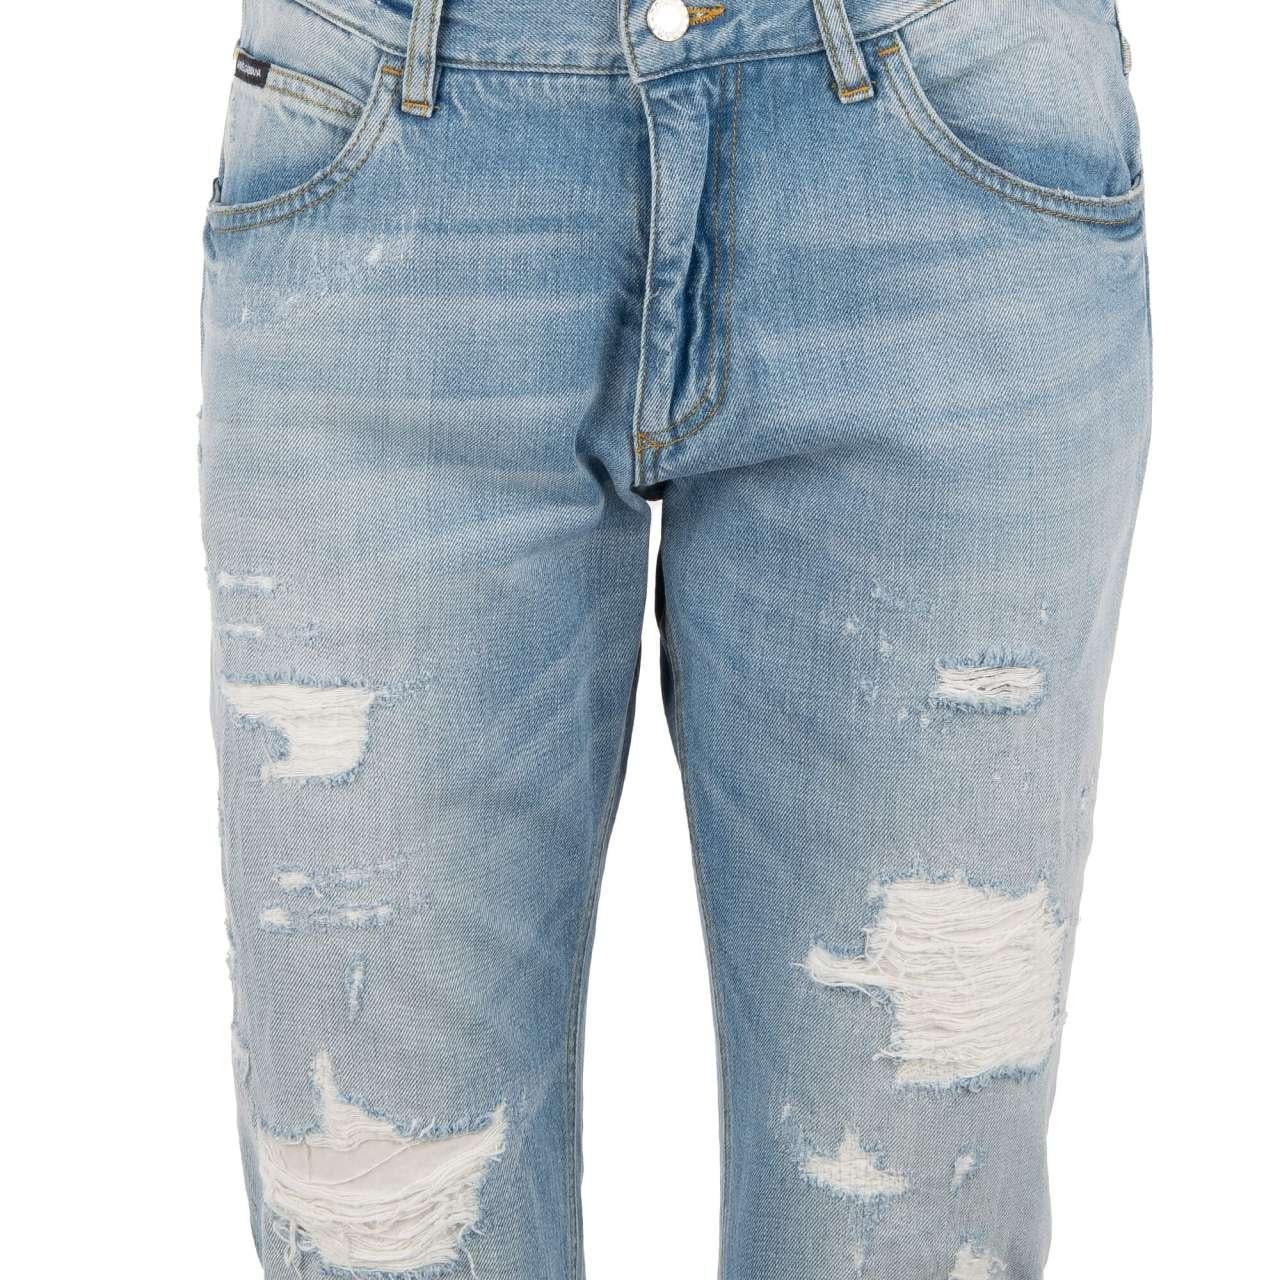 dolce and gabbana plate jeans